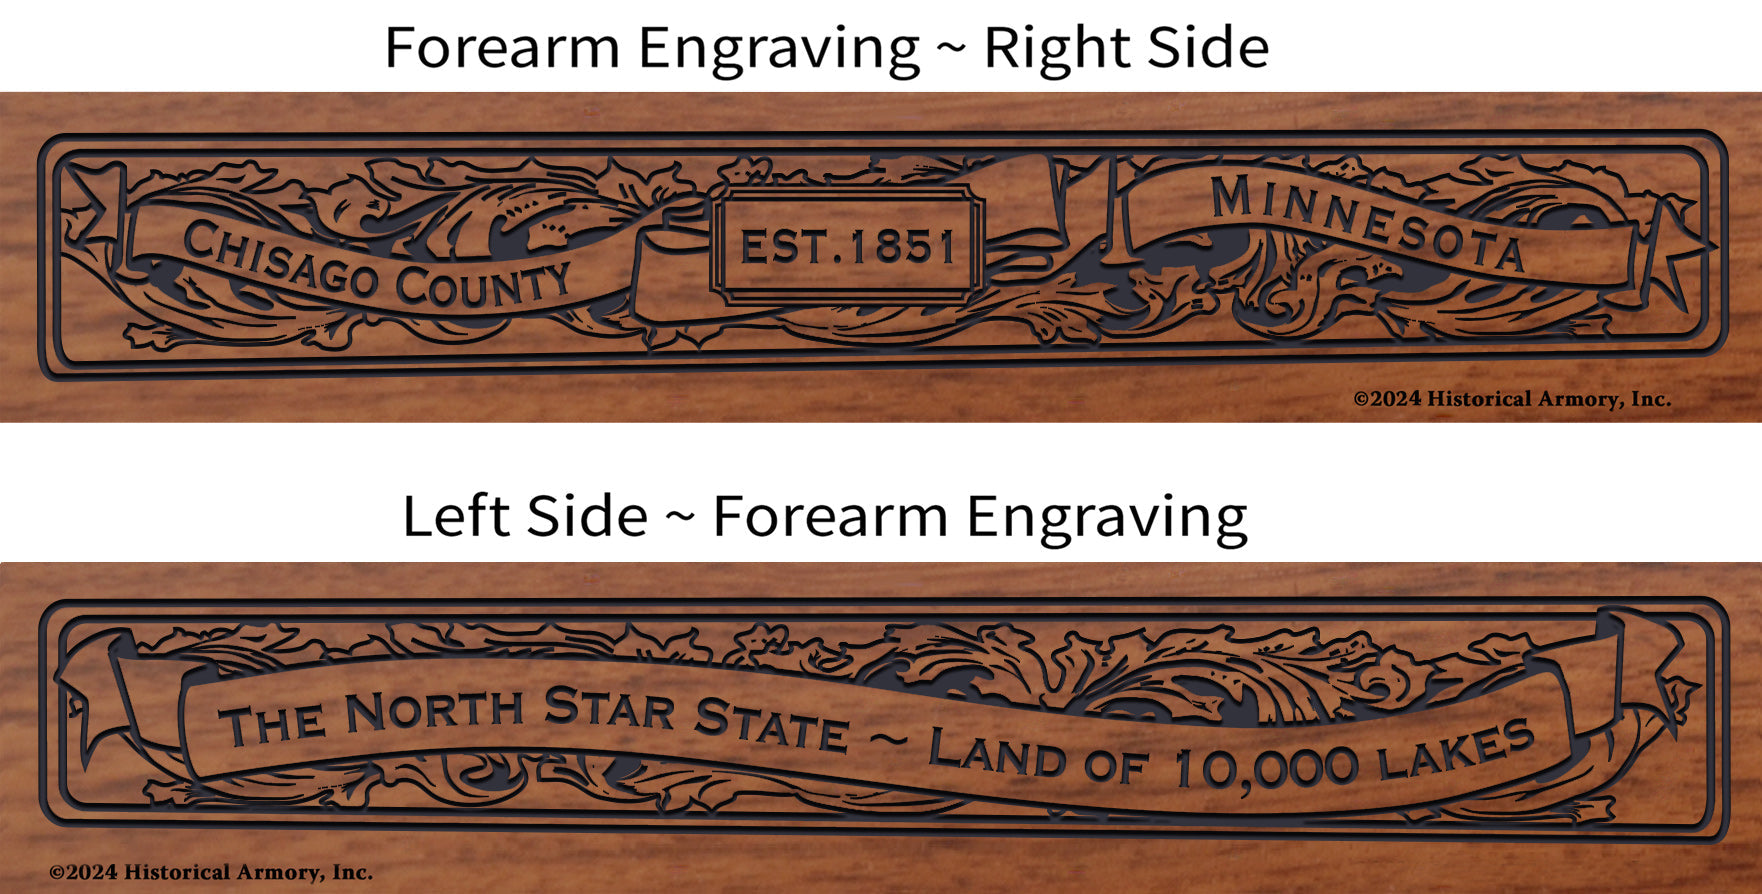 Chisago County Minnesota Engraved Rifle Forearm